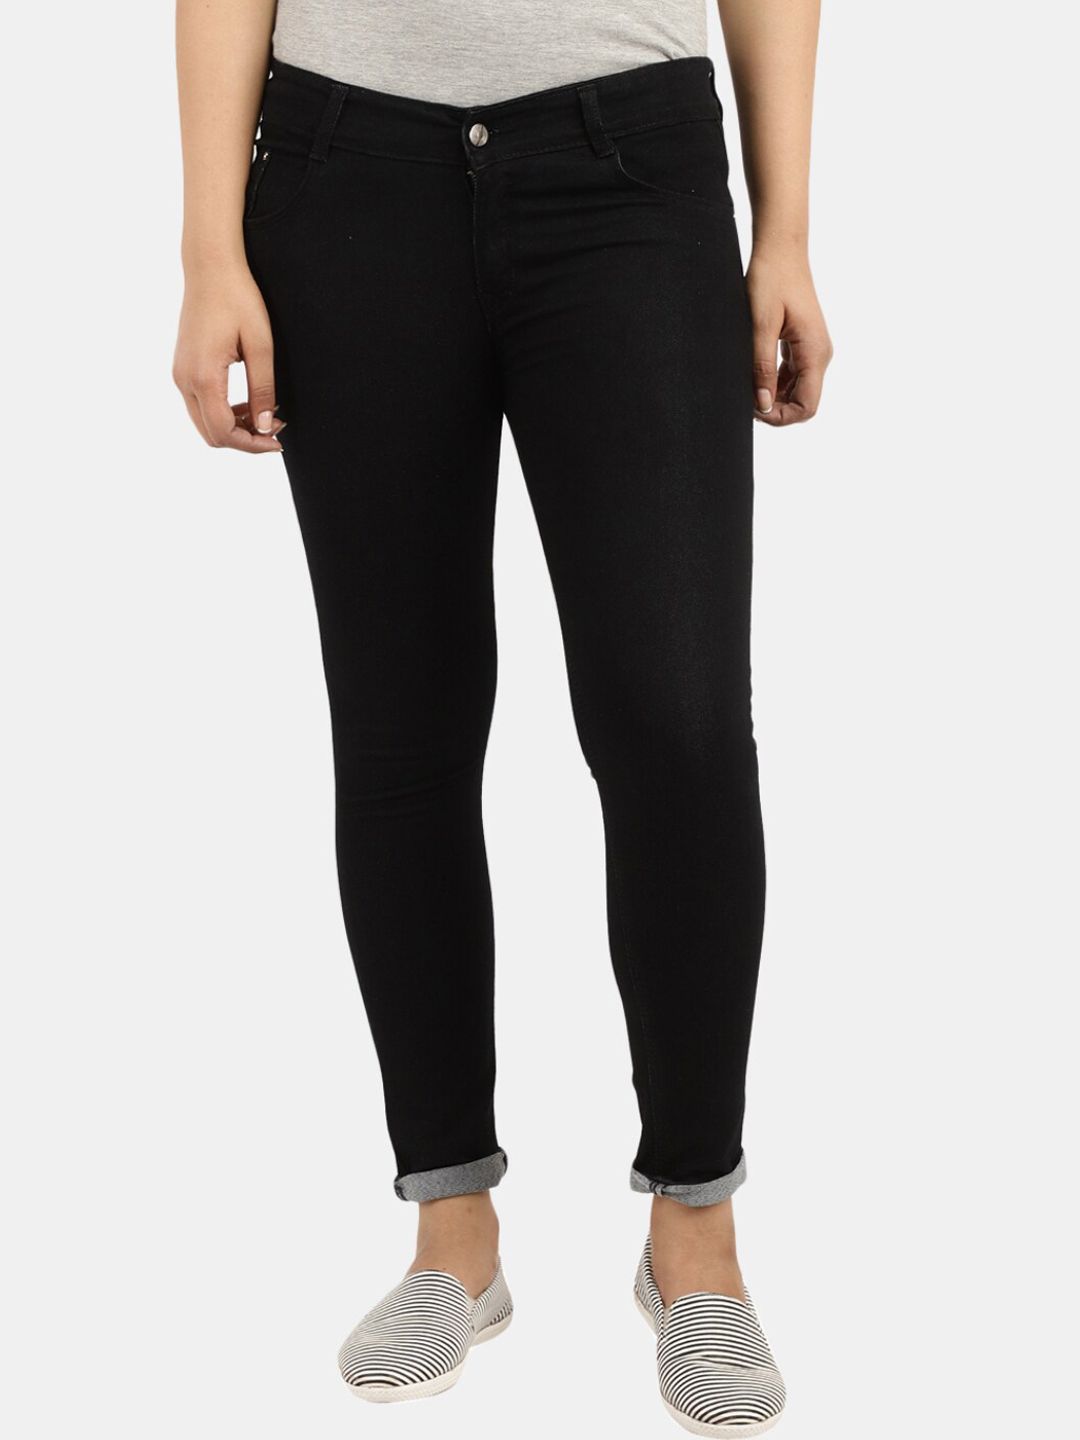 V-Mart Women Black Stretchable Jeans Price in India